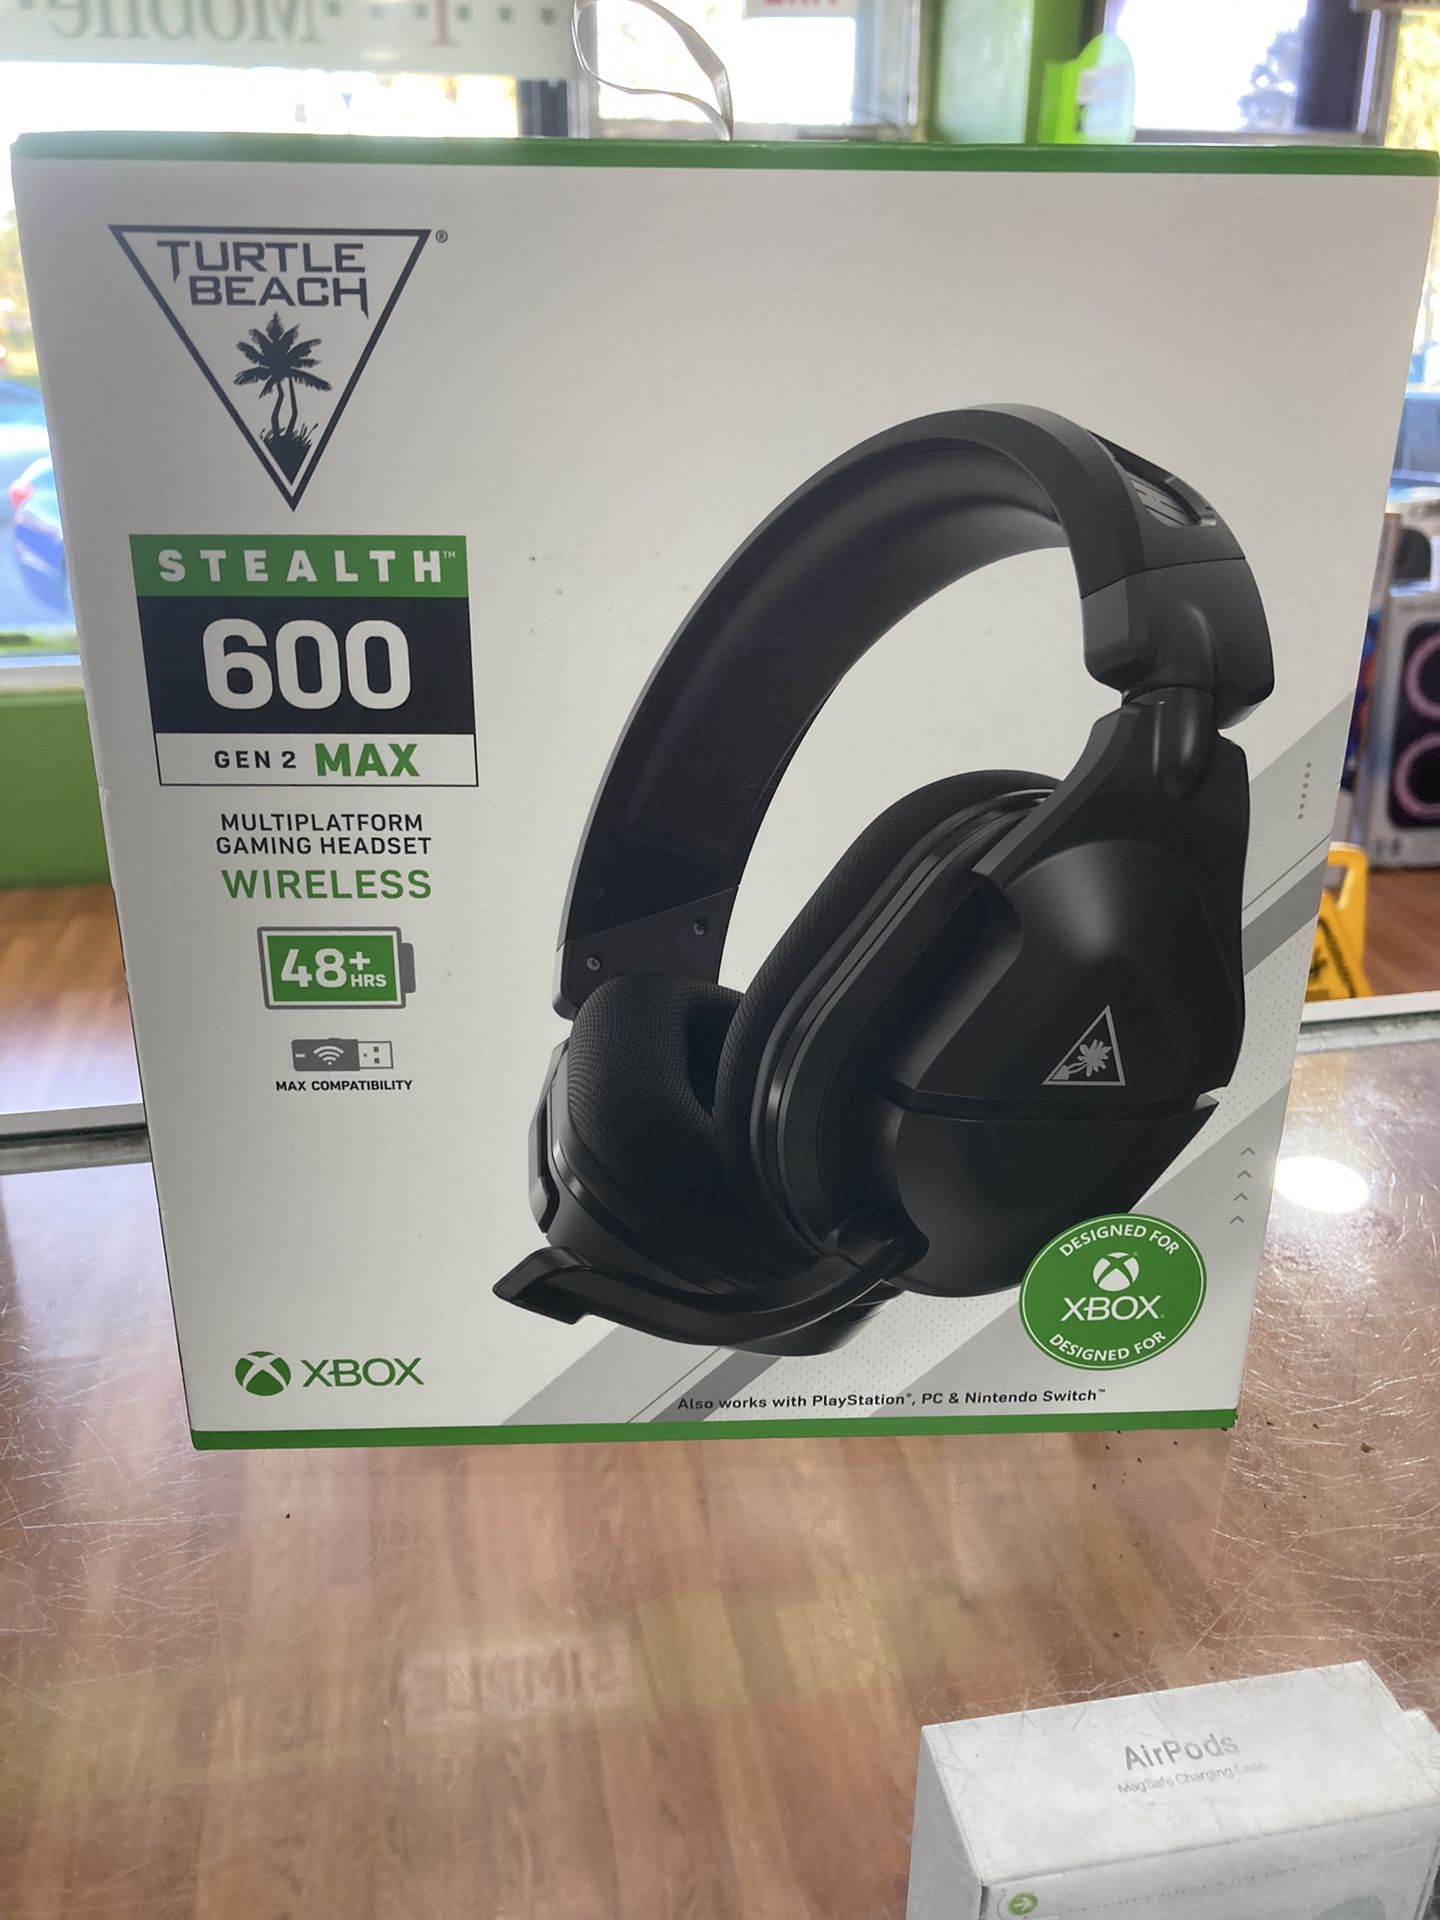 Turtle Beach Stealth 600 Gen 2 MAX W/L Gaming Headset for Xbox Series X|S , XBOX One, PS5, PS4, PS4 Pro, PS4 Slim, Nintendo Switch, PC & Mac - Black